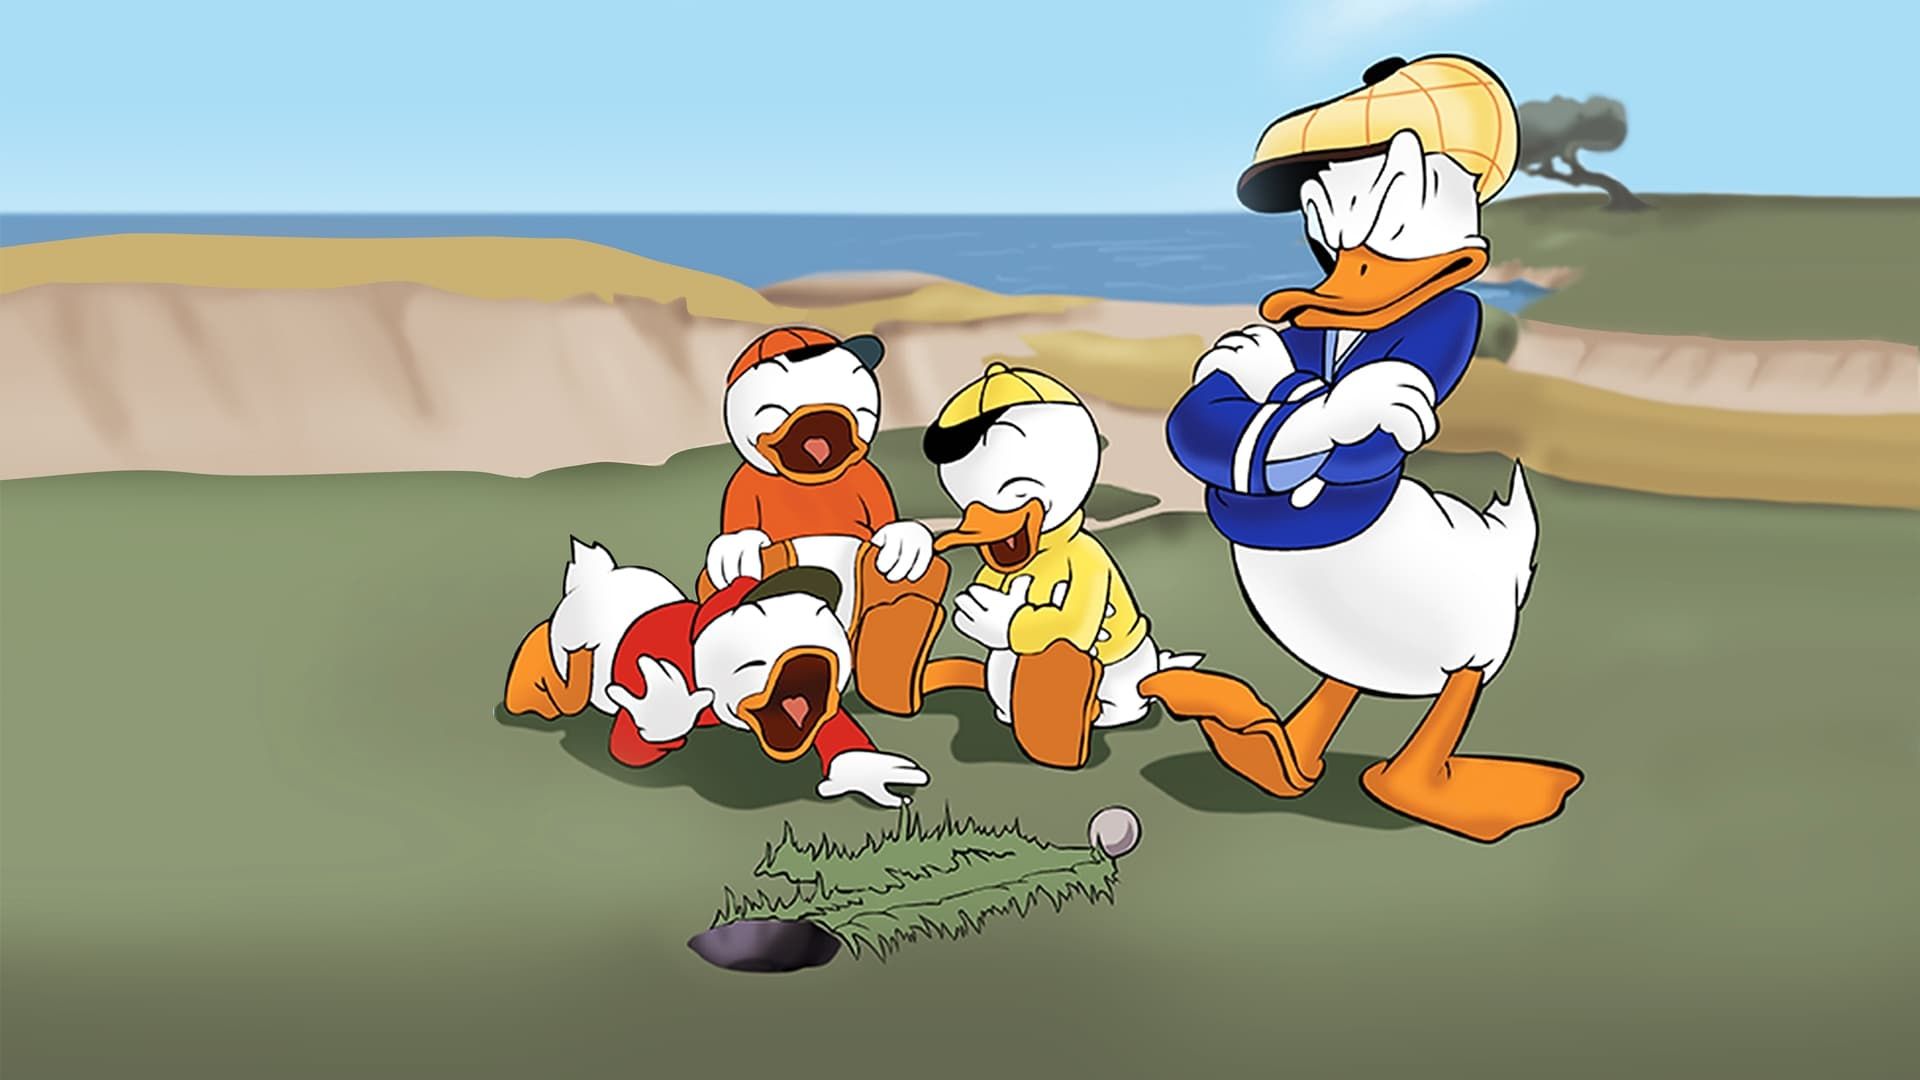 Donald's Golf Game background